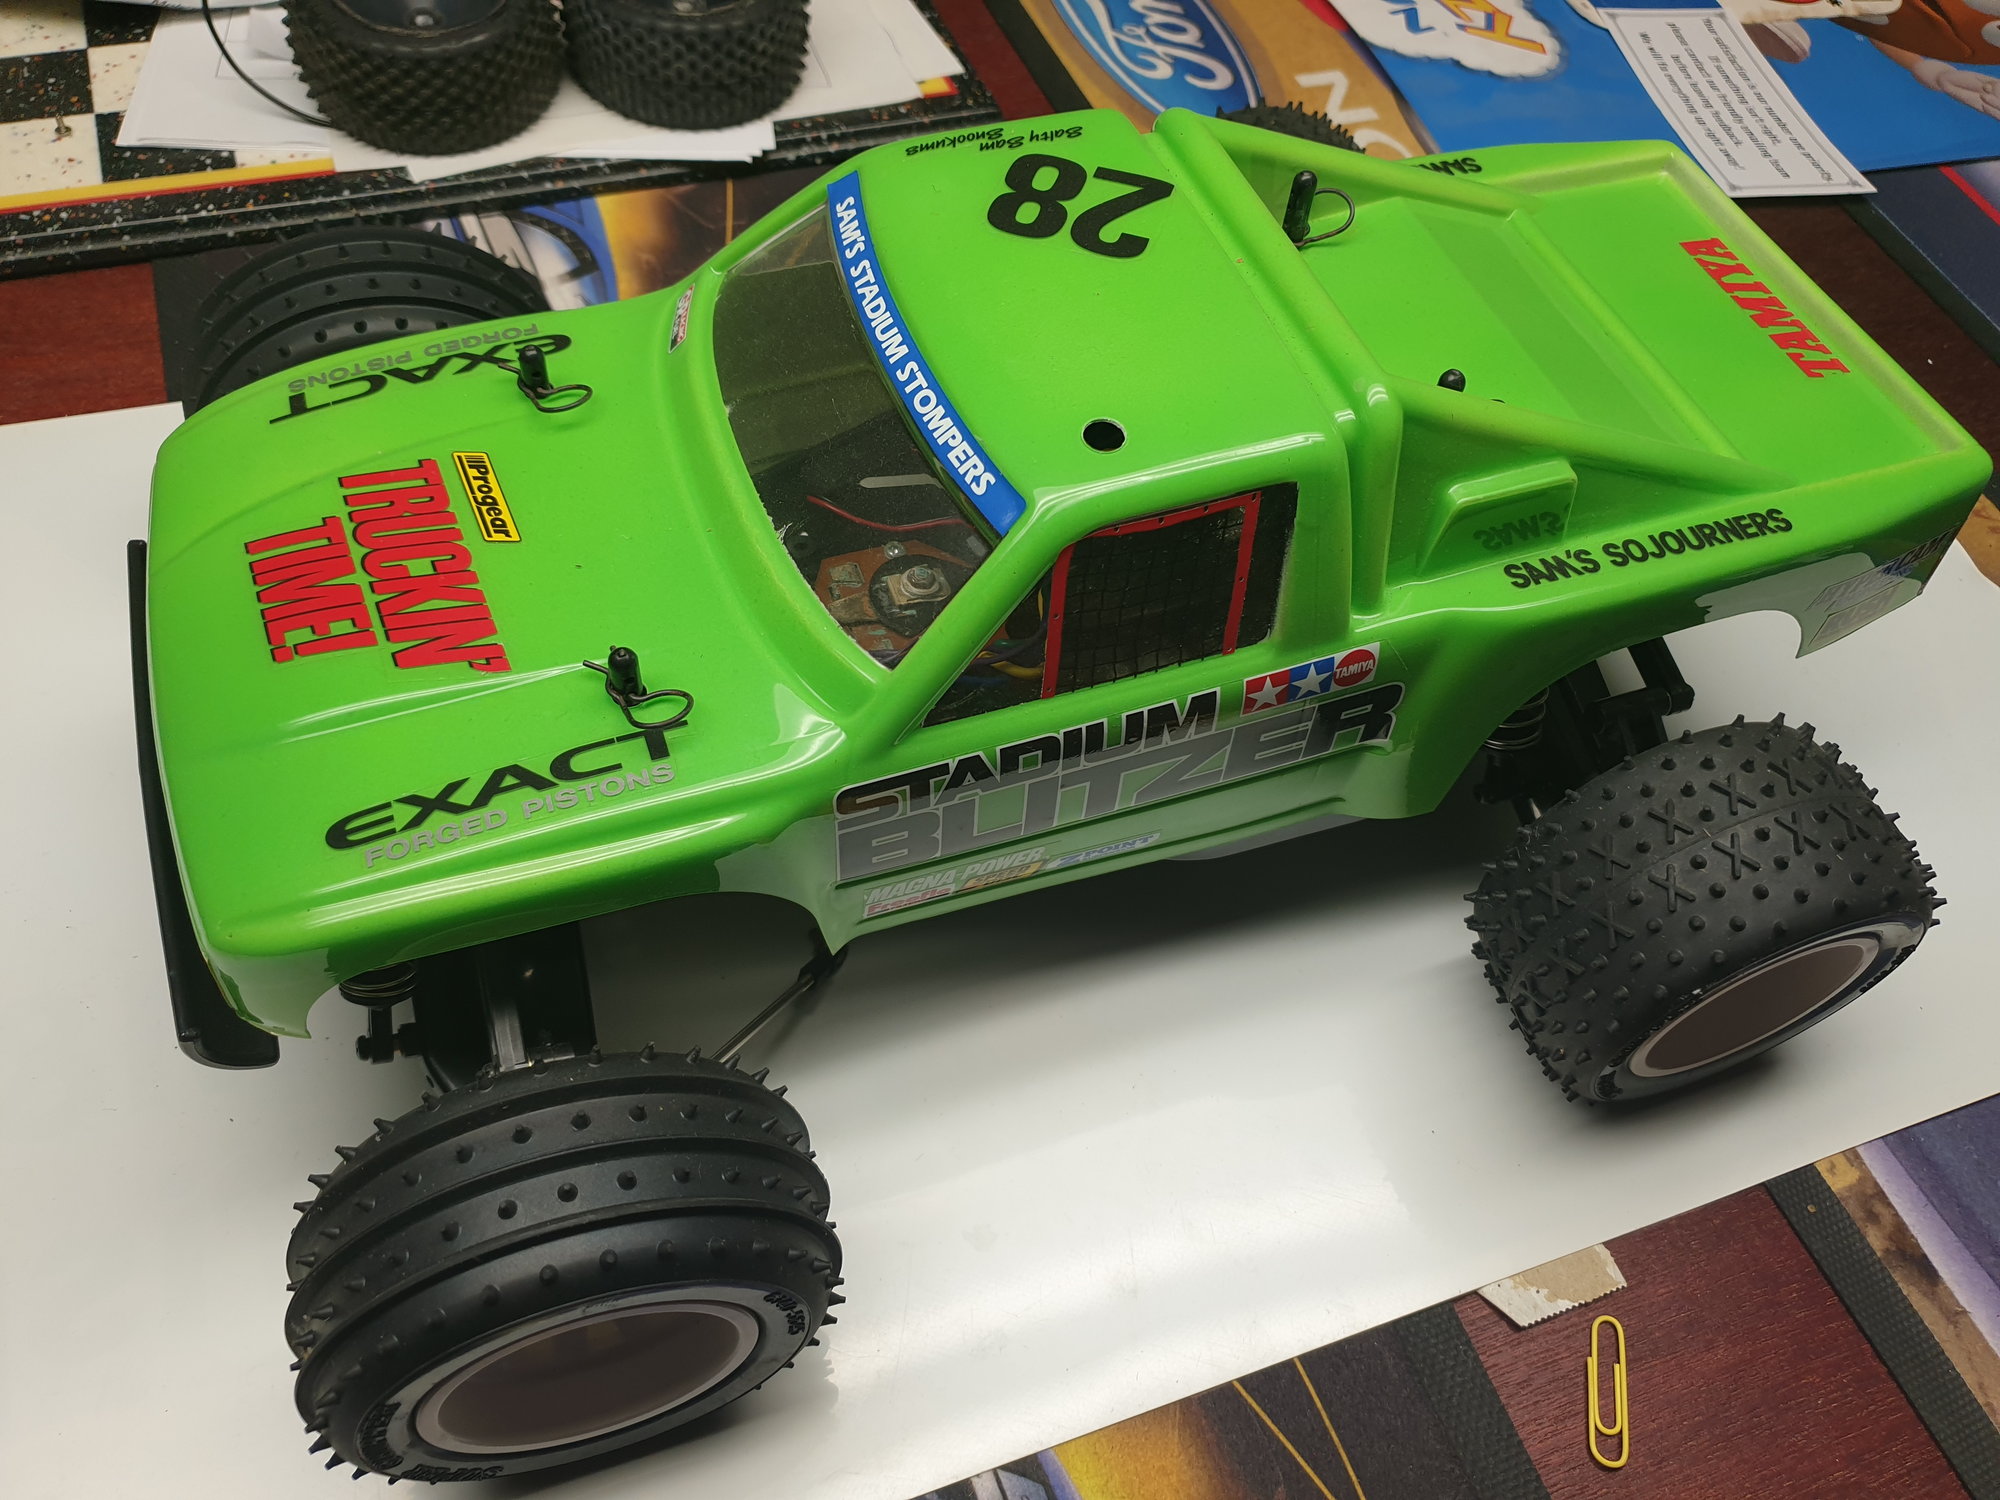 Vintage Tamiya sell out grb celica, stadium blitzer, sand scorcher, decals  all orig - R/C Tech Forums